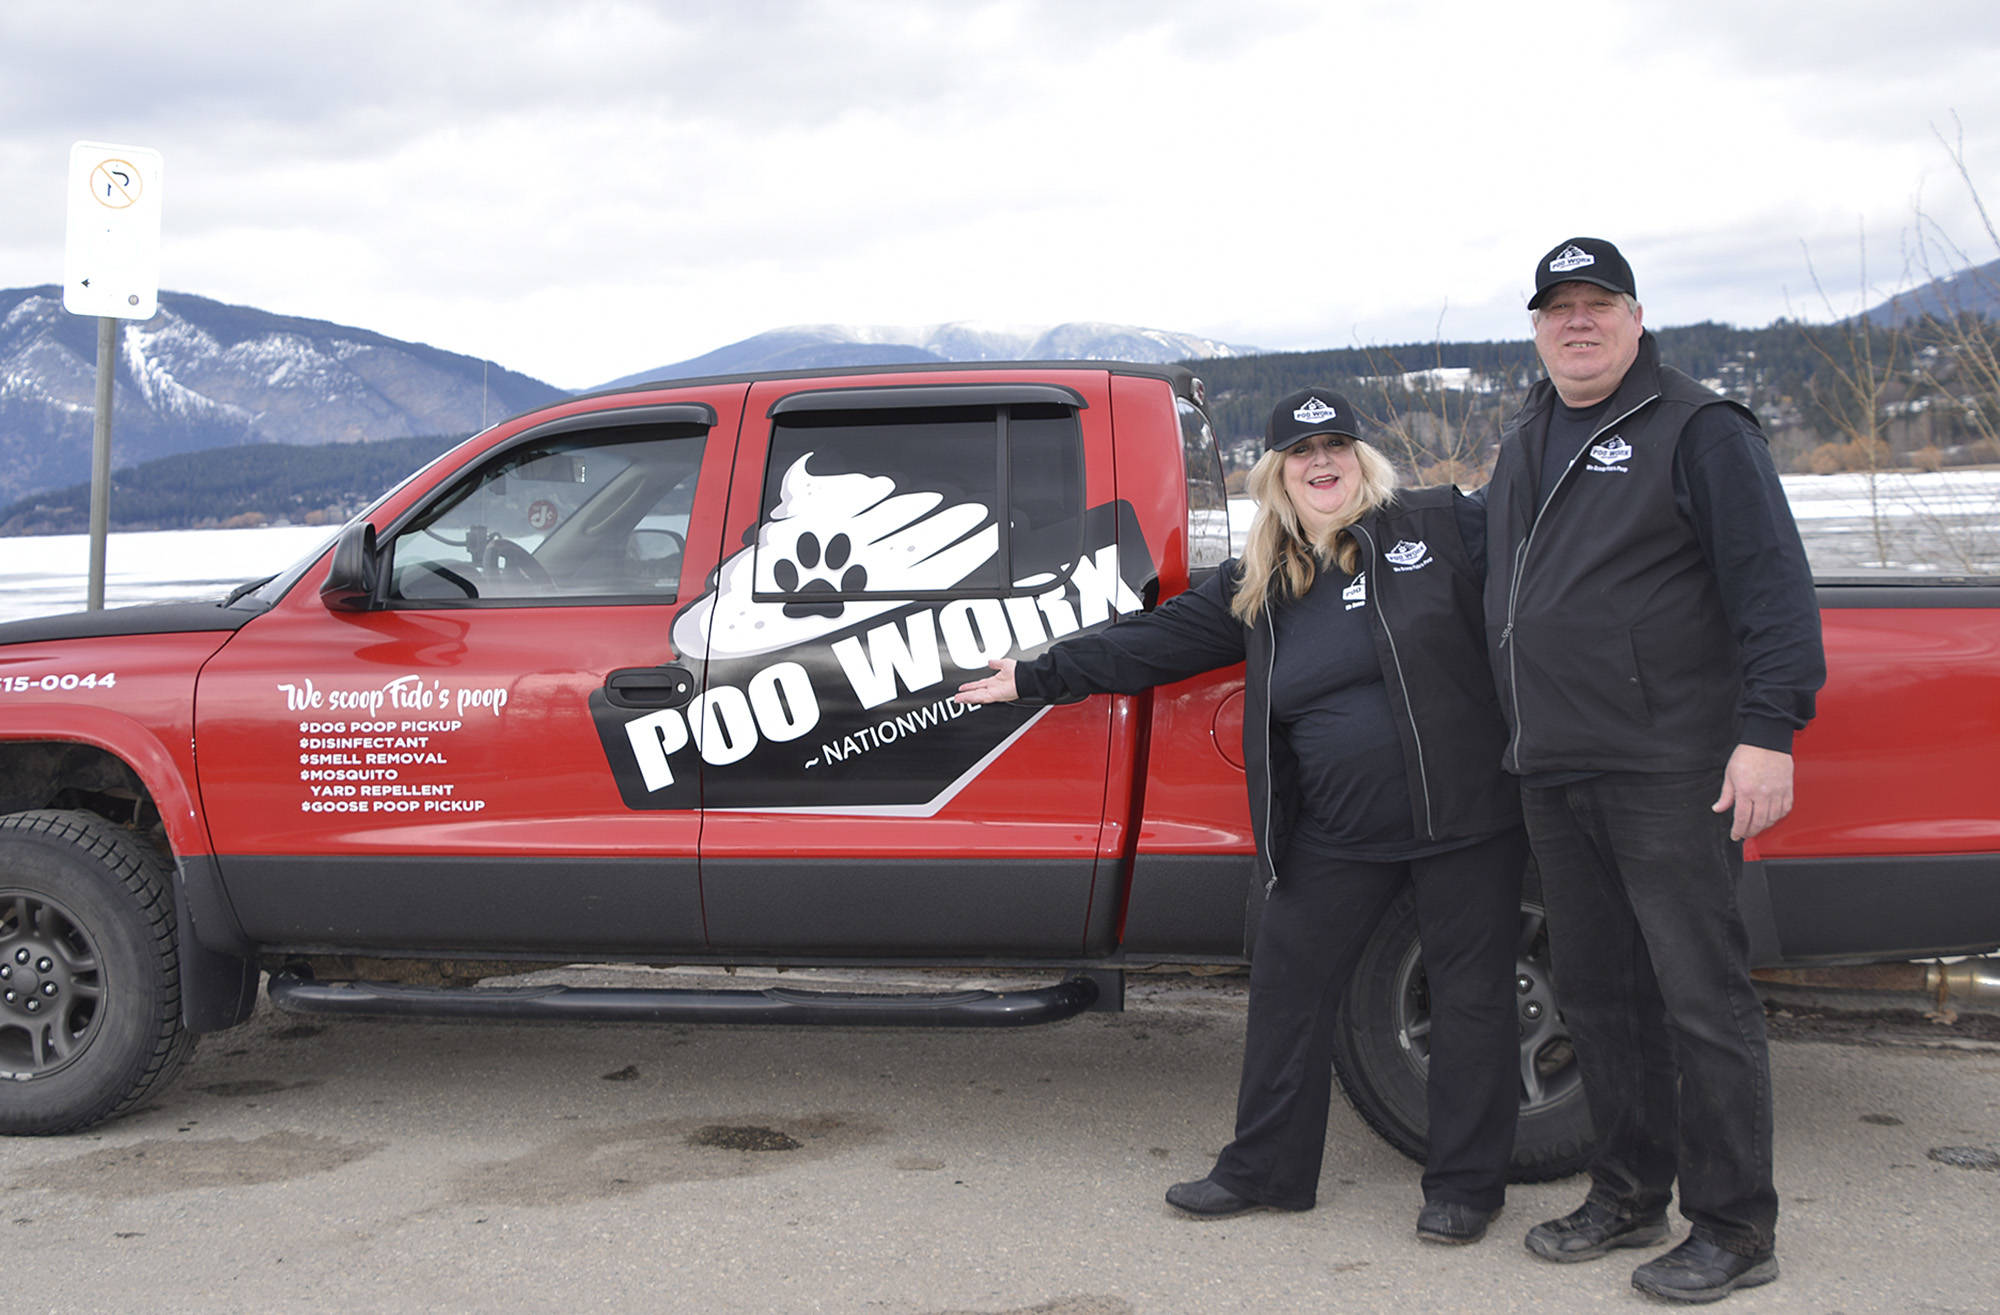 Barbara Bernard and Bob Spracklin have brought Poo Worx to Salmon Arm with help from their mentor from the Poo Worx business in Kelowna. The business provides dog poop pickup and related services. (Martha Wickett - Salmon Arm Observer)